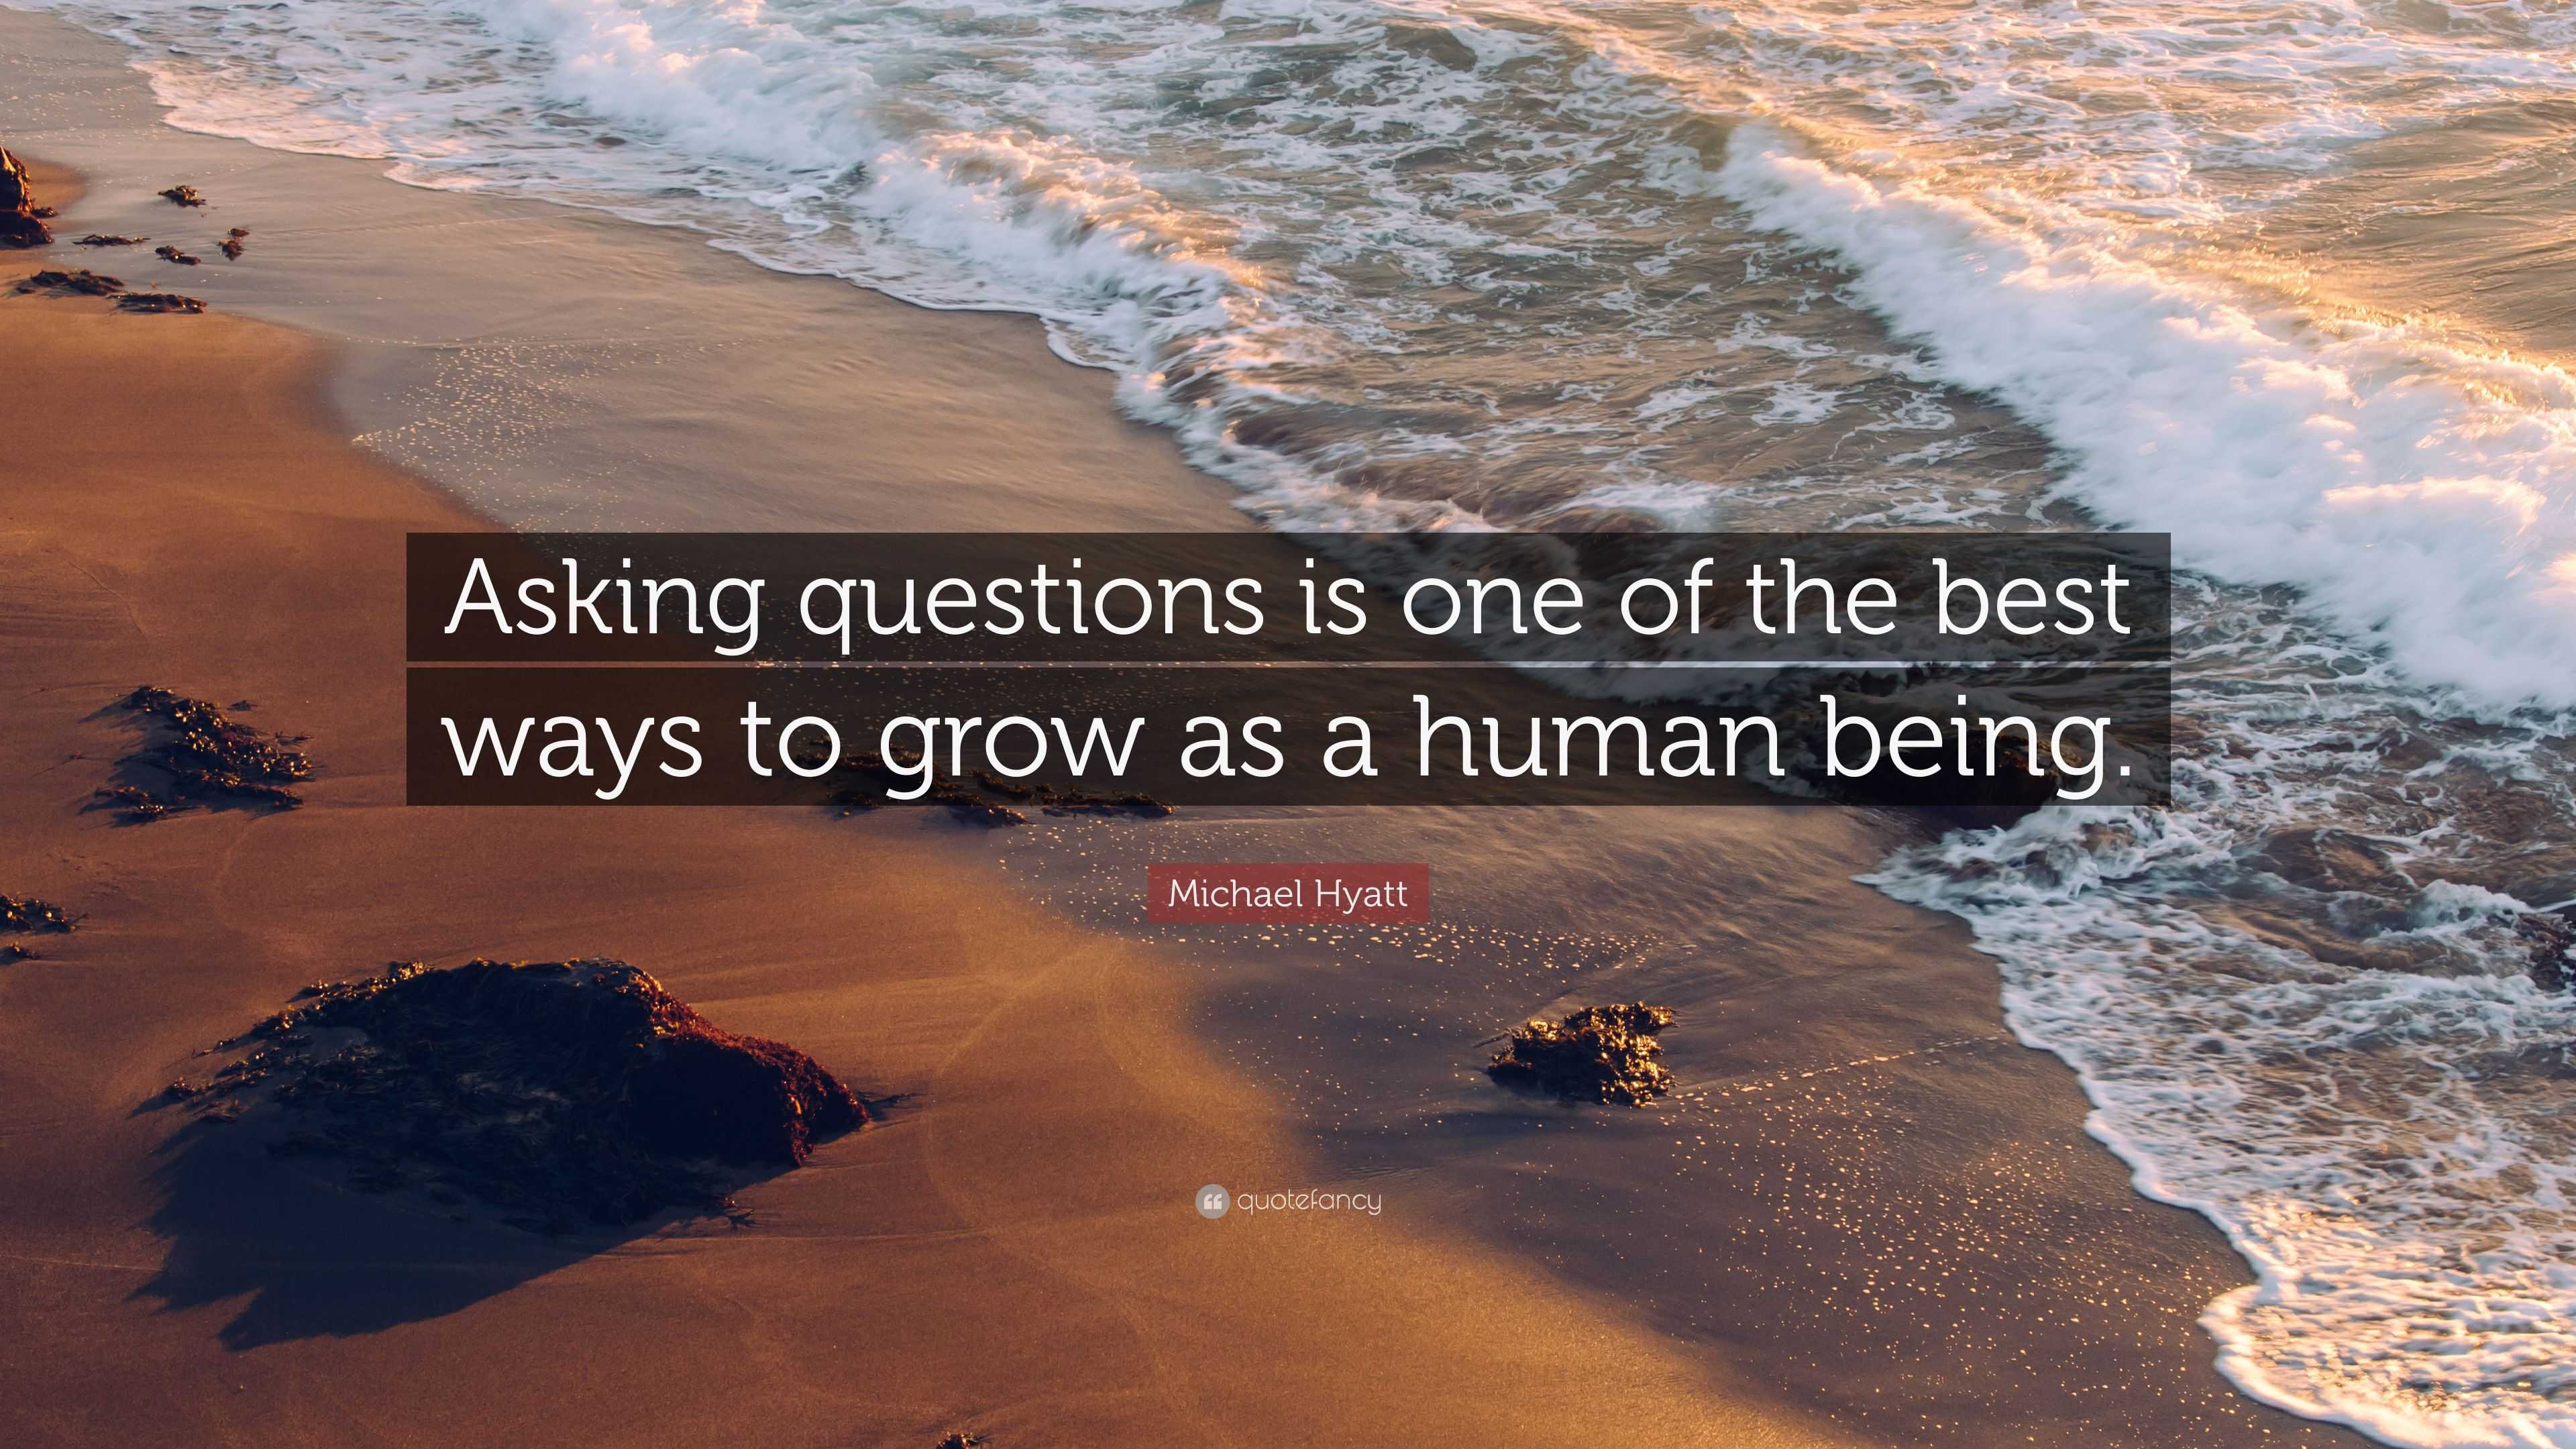 Michael Hyatt Quote: “Asking questions is one of the best ways to grow